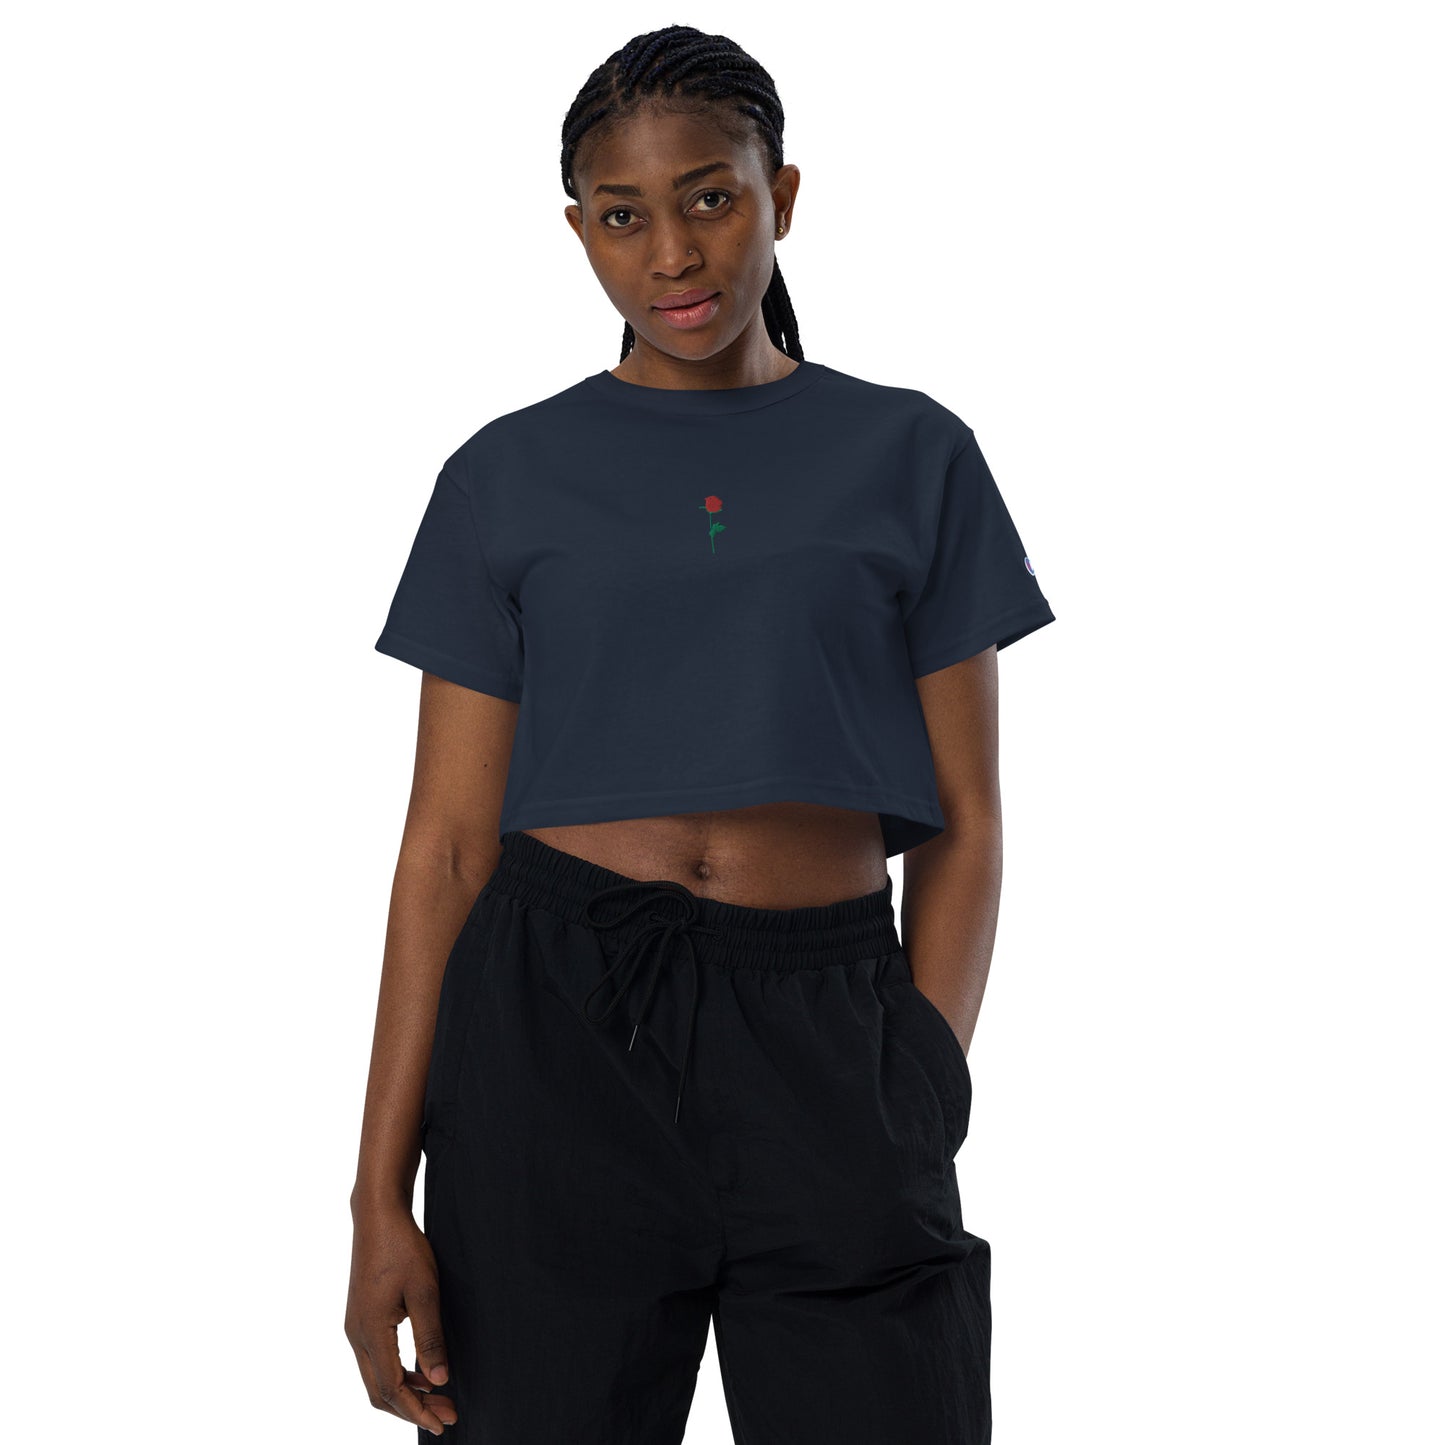 Adonis-Creations Women's Simple Embroidered Cotton Crop Top